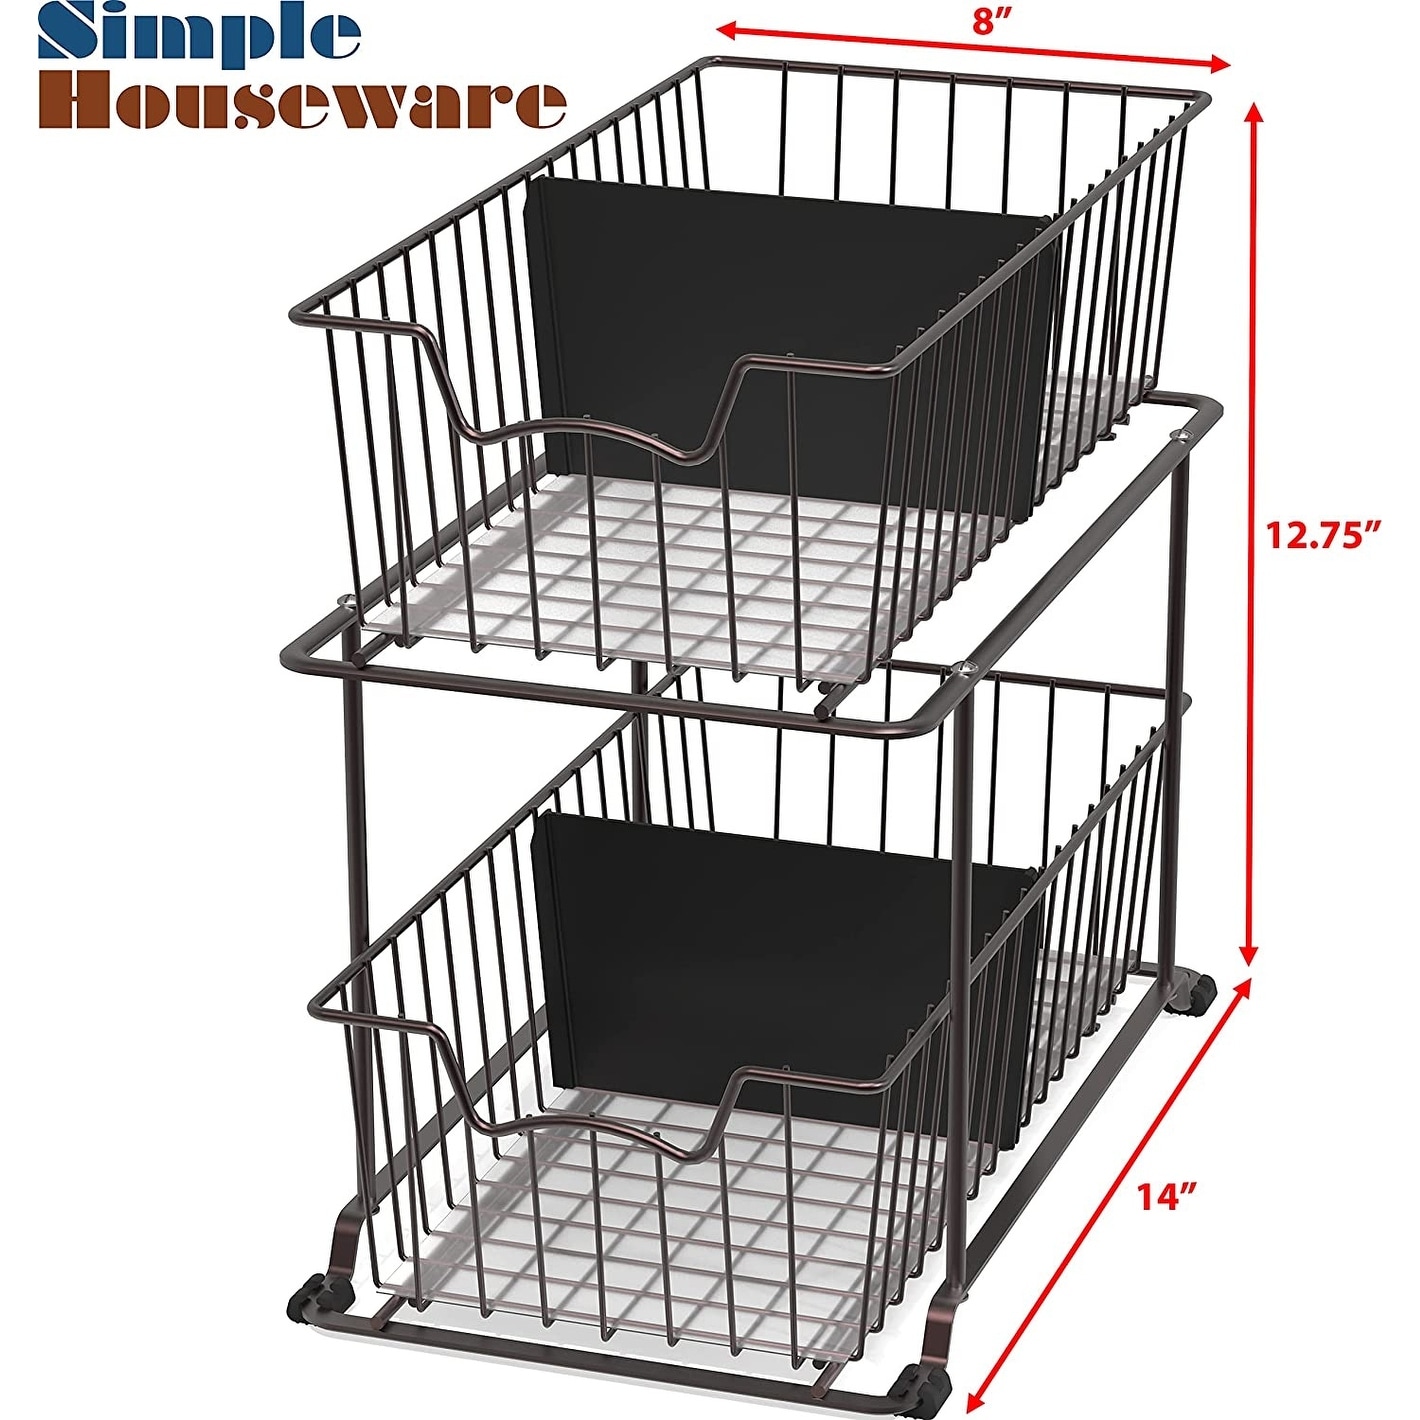 https://ak1.ostkcdn.com/images/products/is/images/direct/15e5be017996952d0407e5e1c7af294a82190f51/Simple-Houseware-2-Tier-Cabinet-Wire-Basket-Drawer-Organizer---Brown.jpg